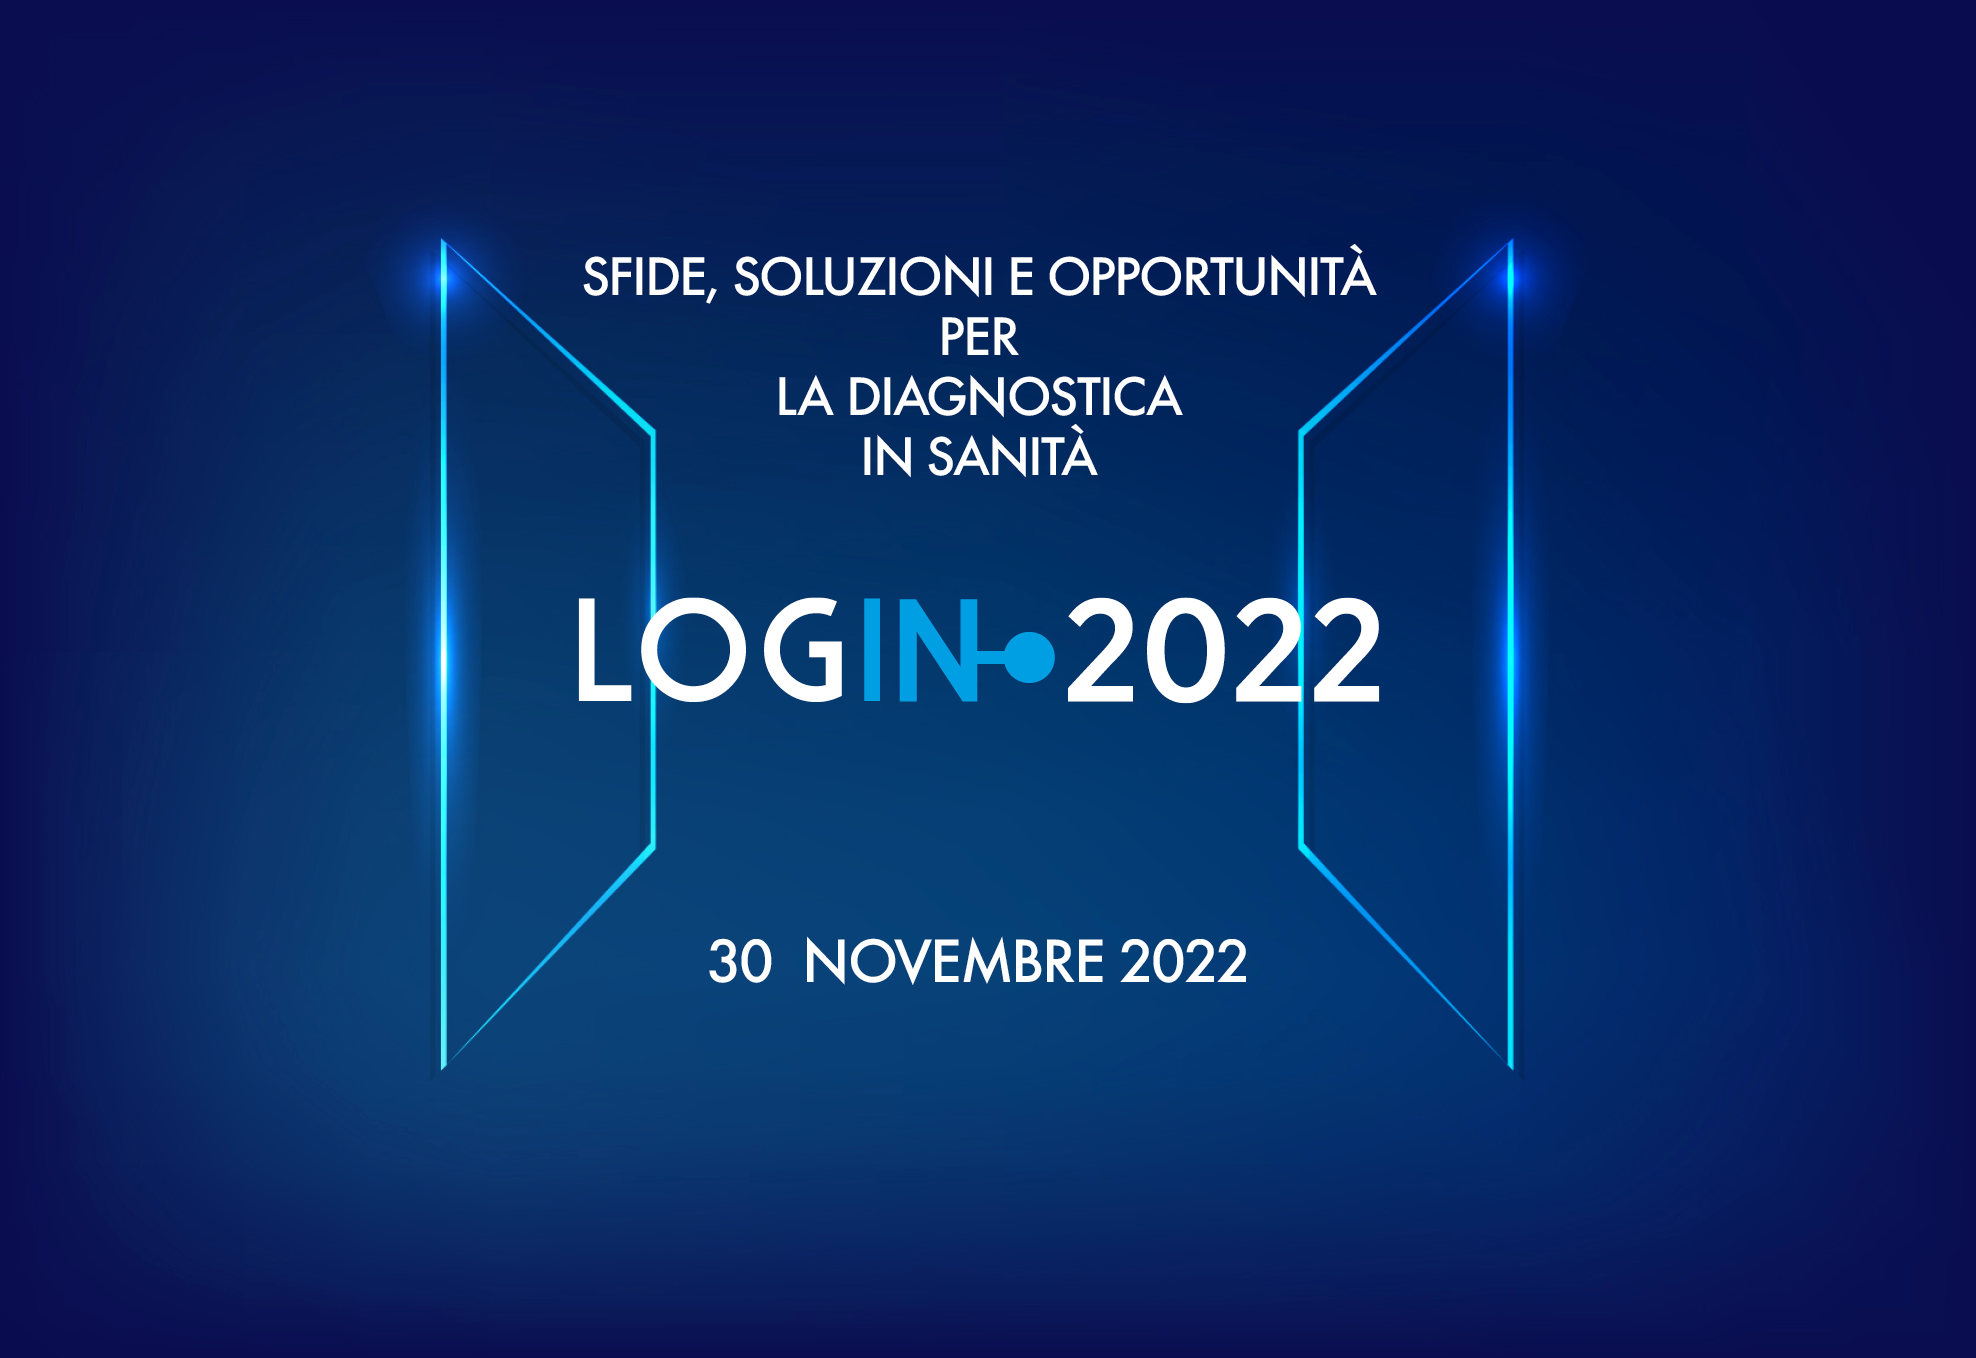 Challenges, solutions and opportunities for the present and future of healthcare diagnostics, November 30th 2022